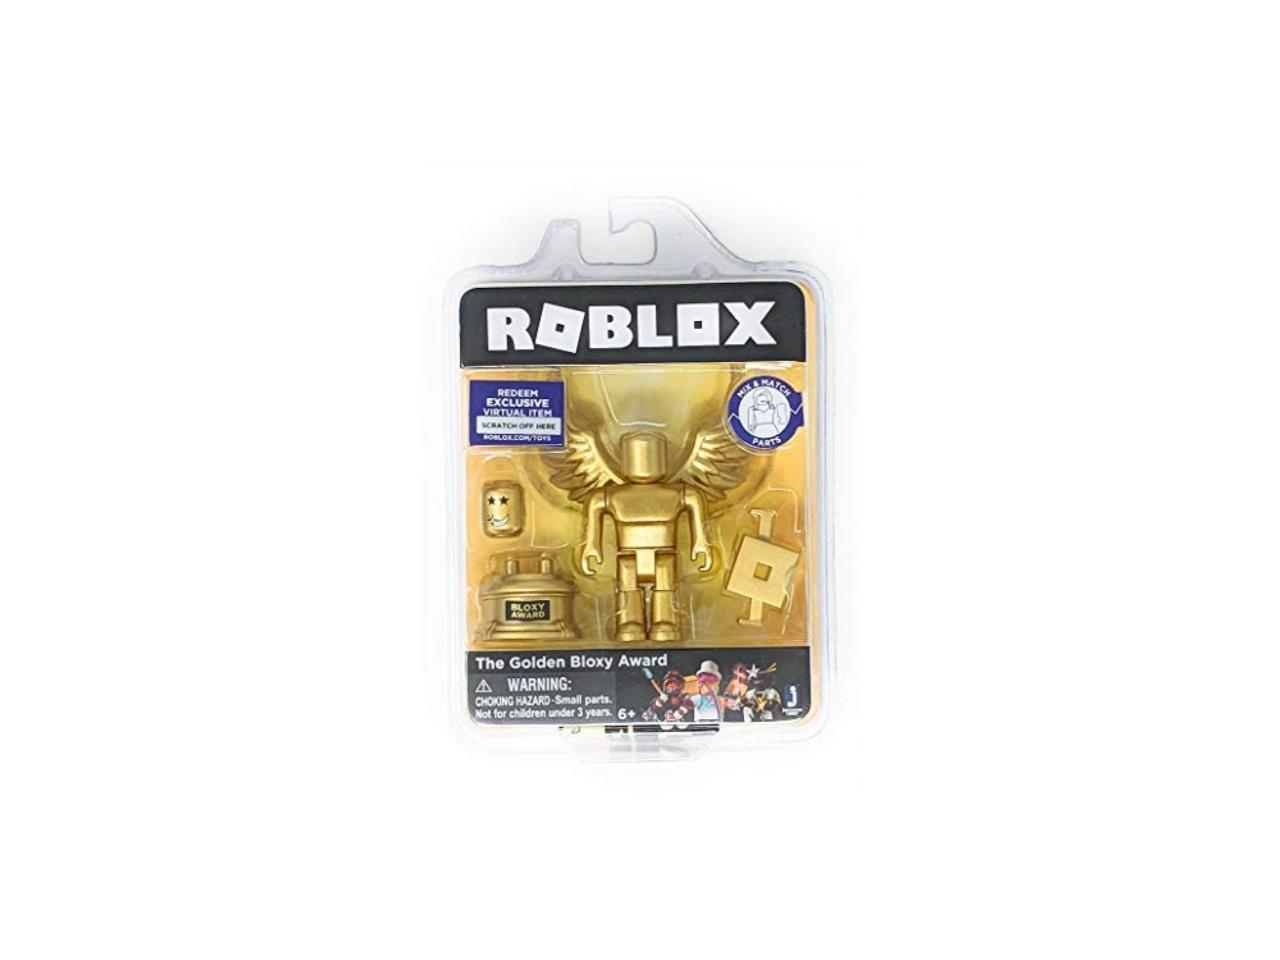 Roblox Gold Collection The Golden Bloxy Award Single Figure Pack With Exclusive Virtual Item Code Newegg Com - roblox roblox high school pack figures accessories code